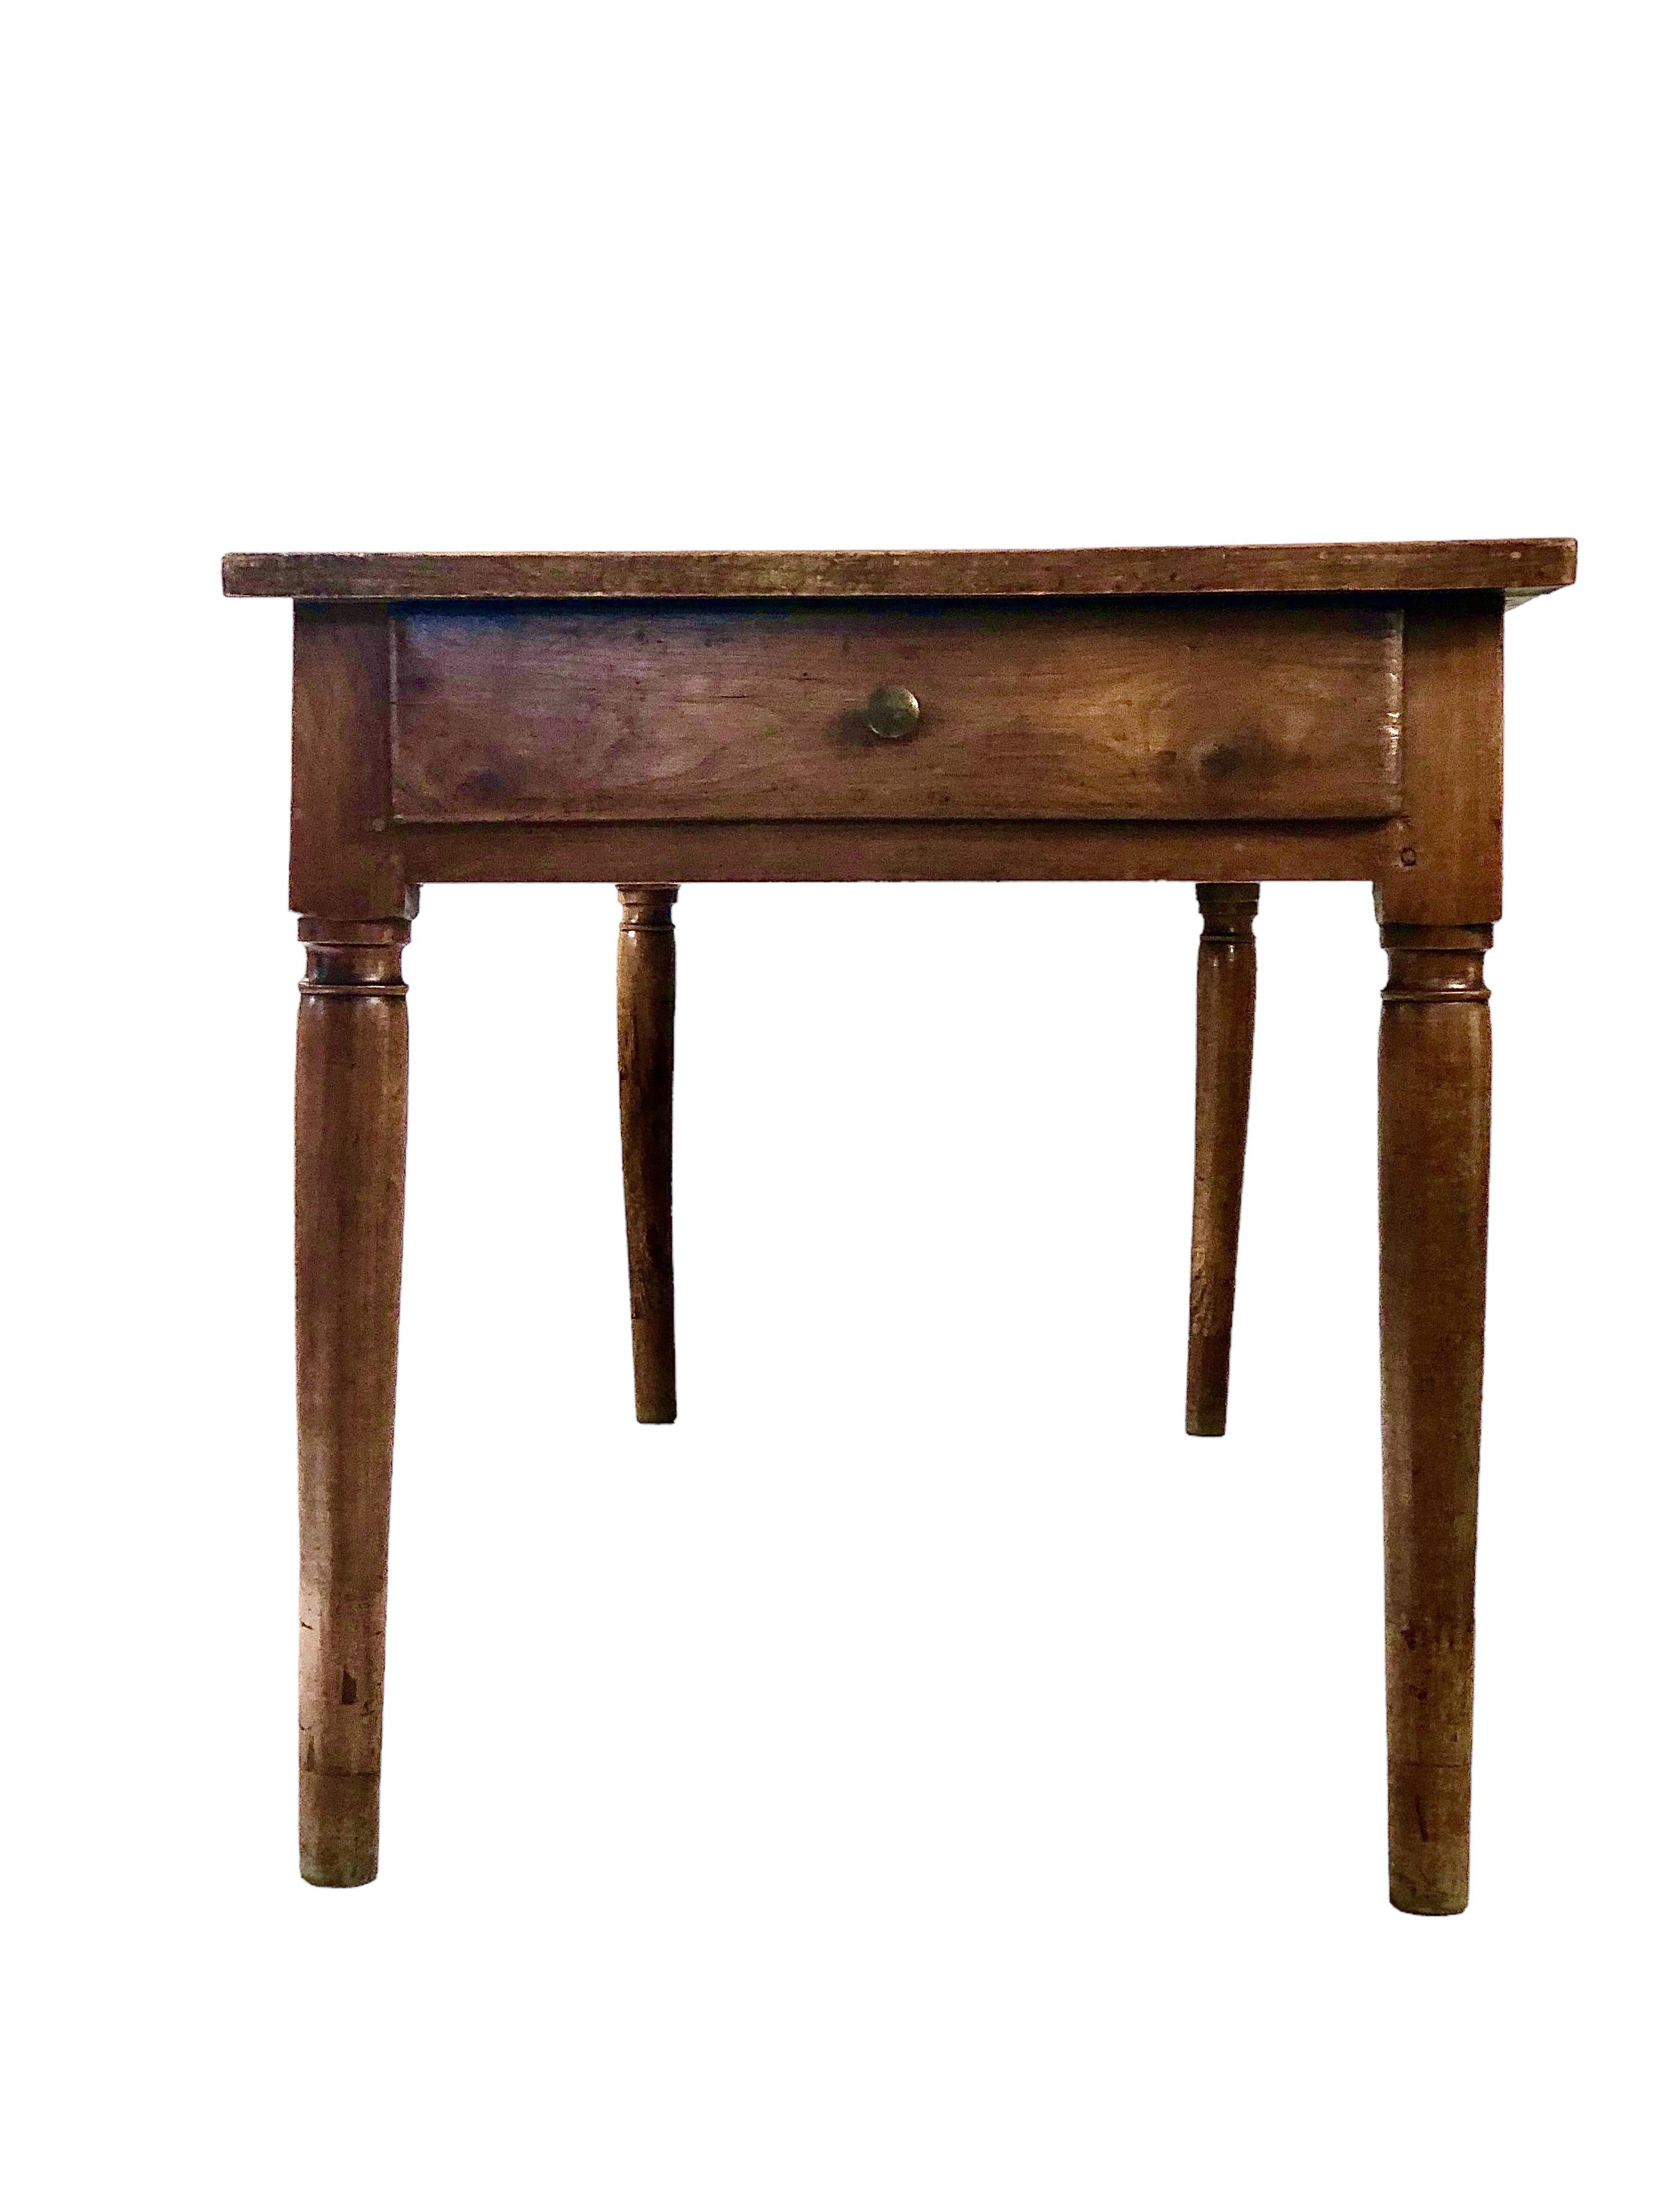 This authentic French farmhouse table features a solid rectangular top, supported by four turned legs. A nice patina and a desirable age wear are adding to its character and charm. The frieze has two extra-long storage drawers. It will seat 8 people